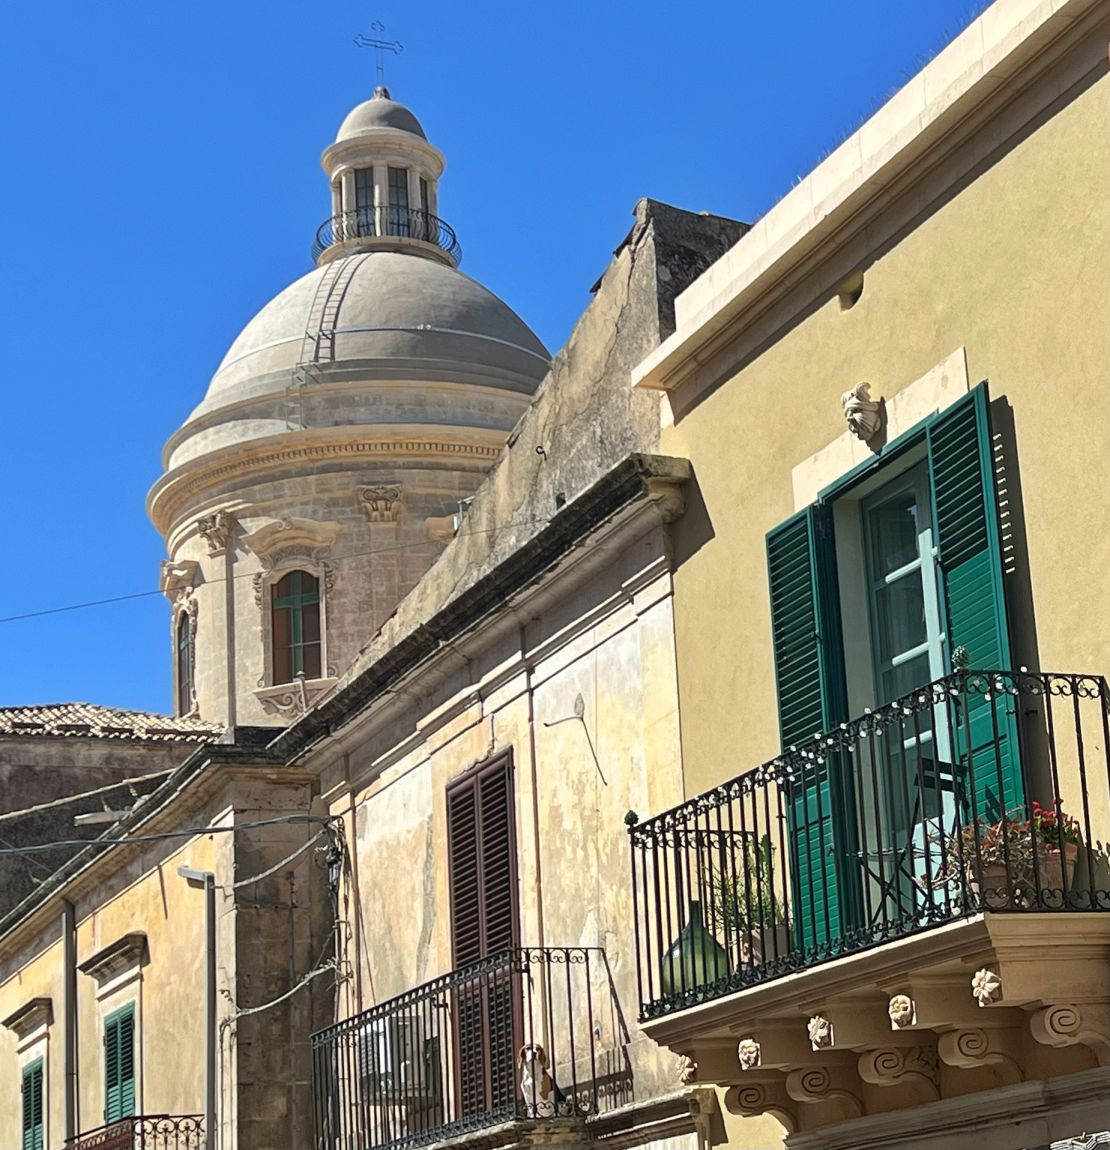 The couple purchased their two-bedroom home in Noto, Sicily for 90,000 euros (around $97,000.)